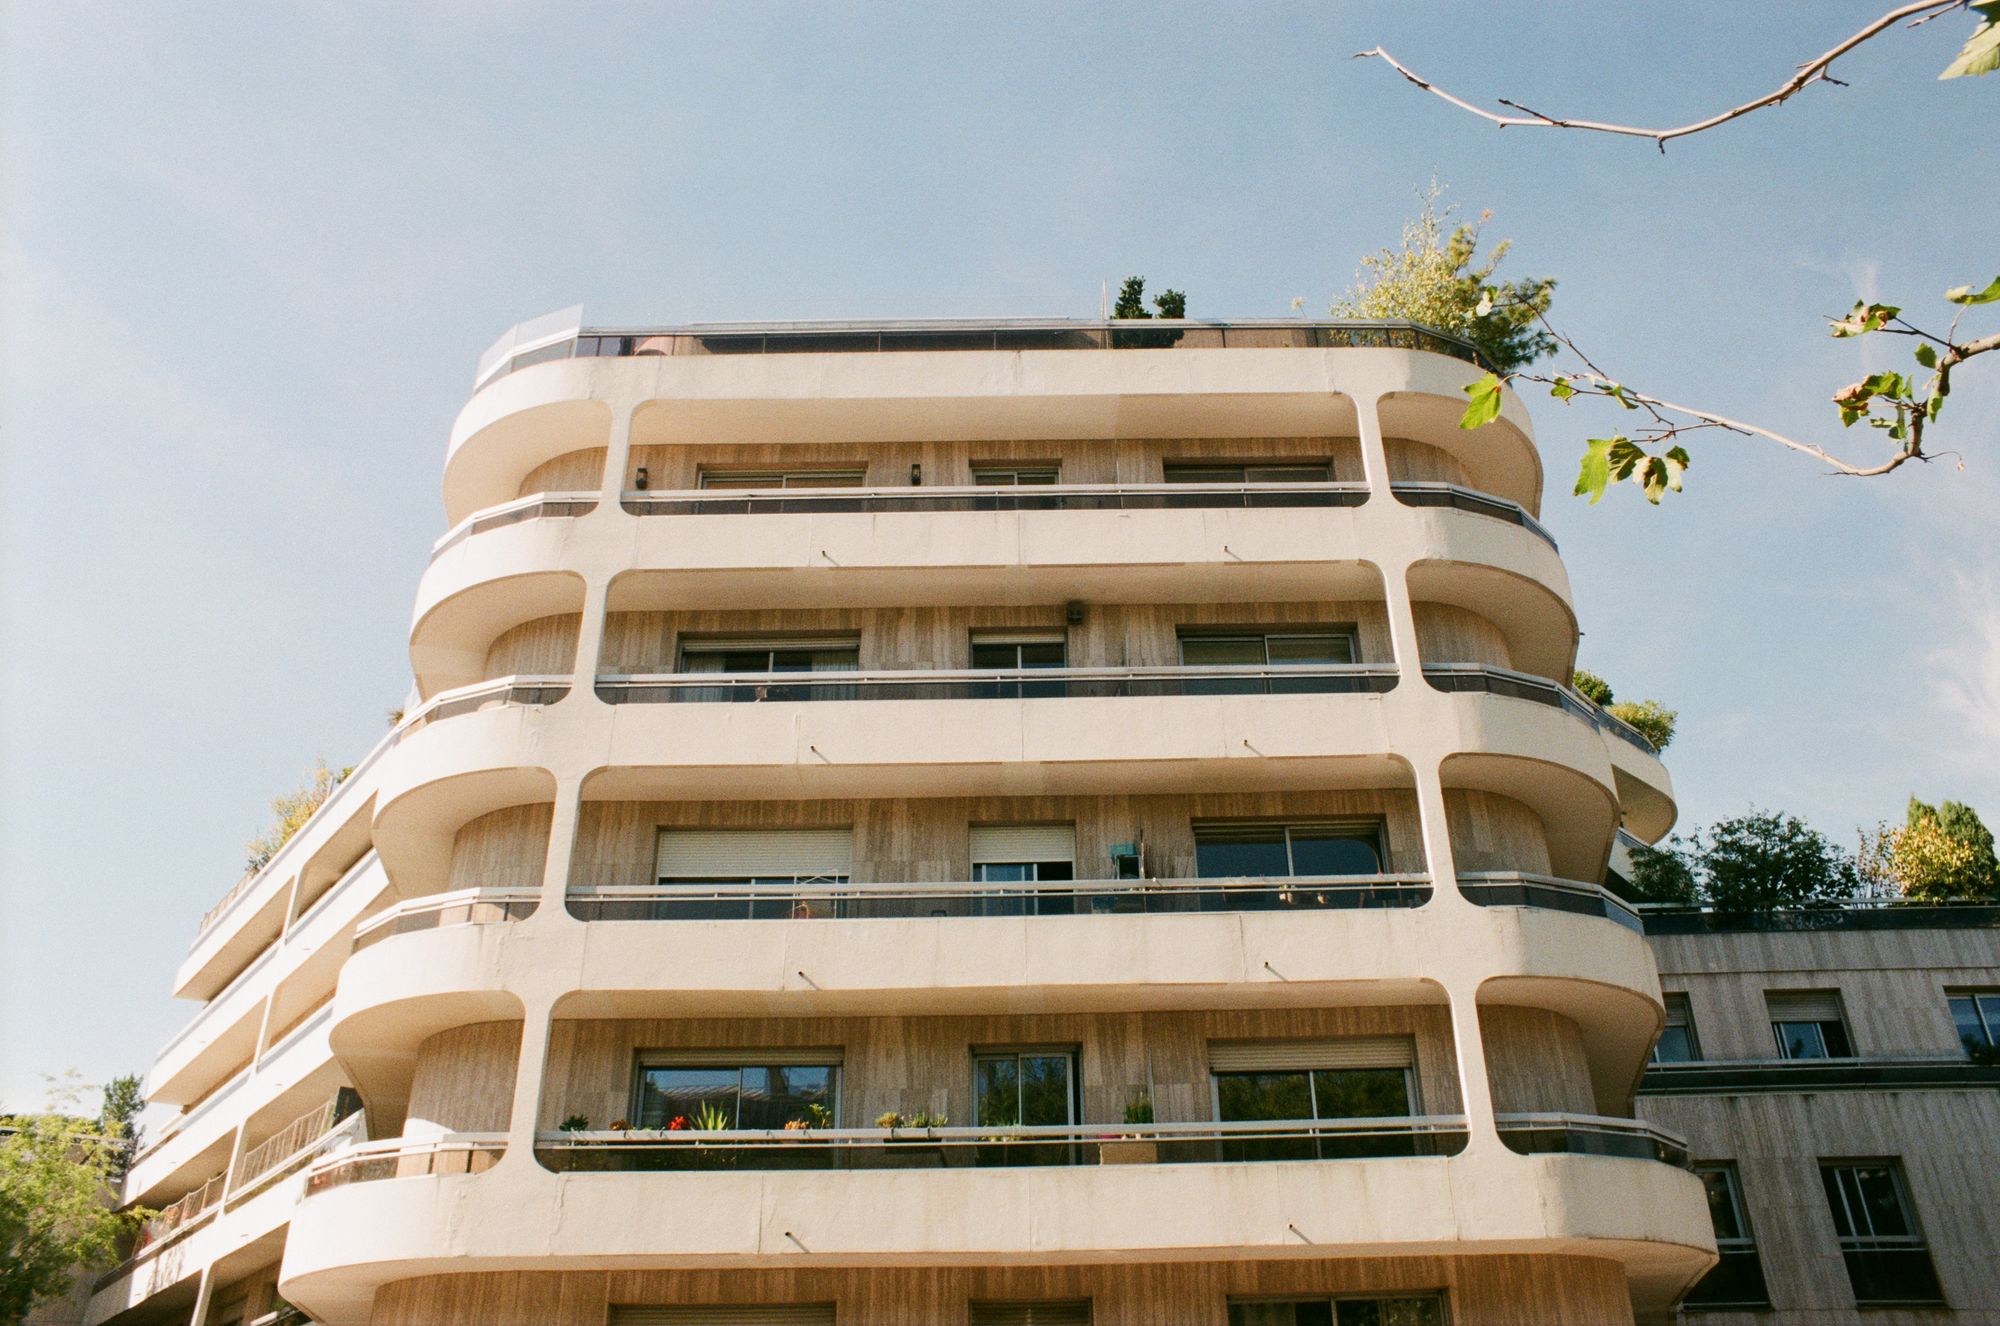 Concrete building with rounded edges with balconies on each of its 5 upper levels. Two trees peep out from the top. There's a tree in the foreground too.